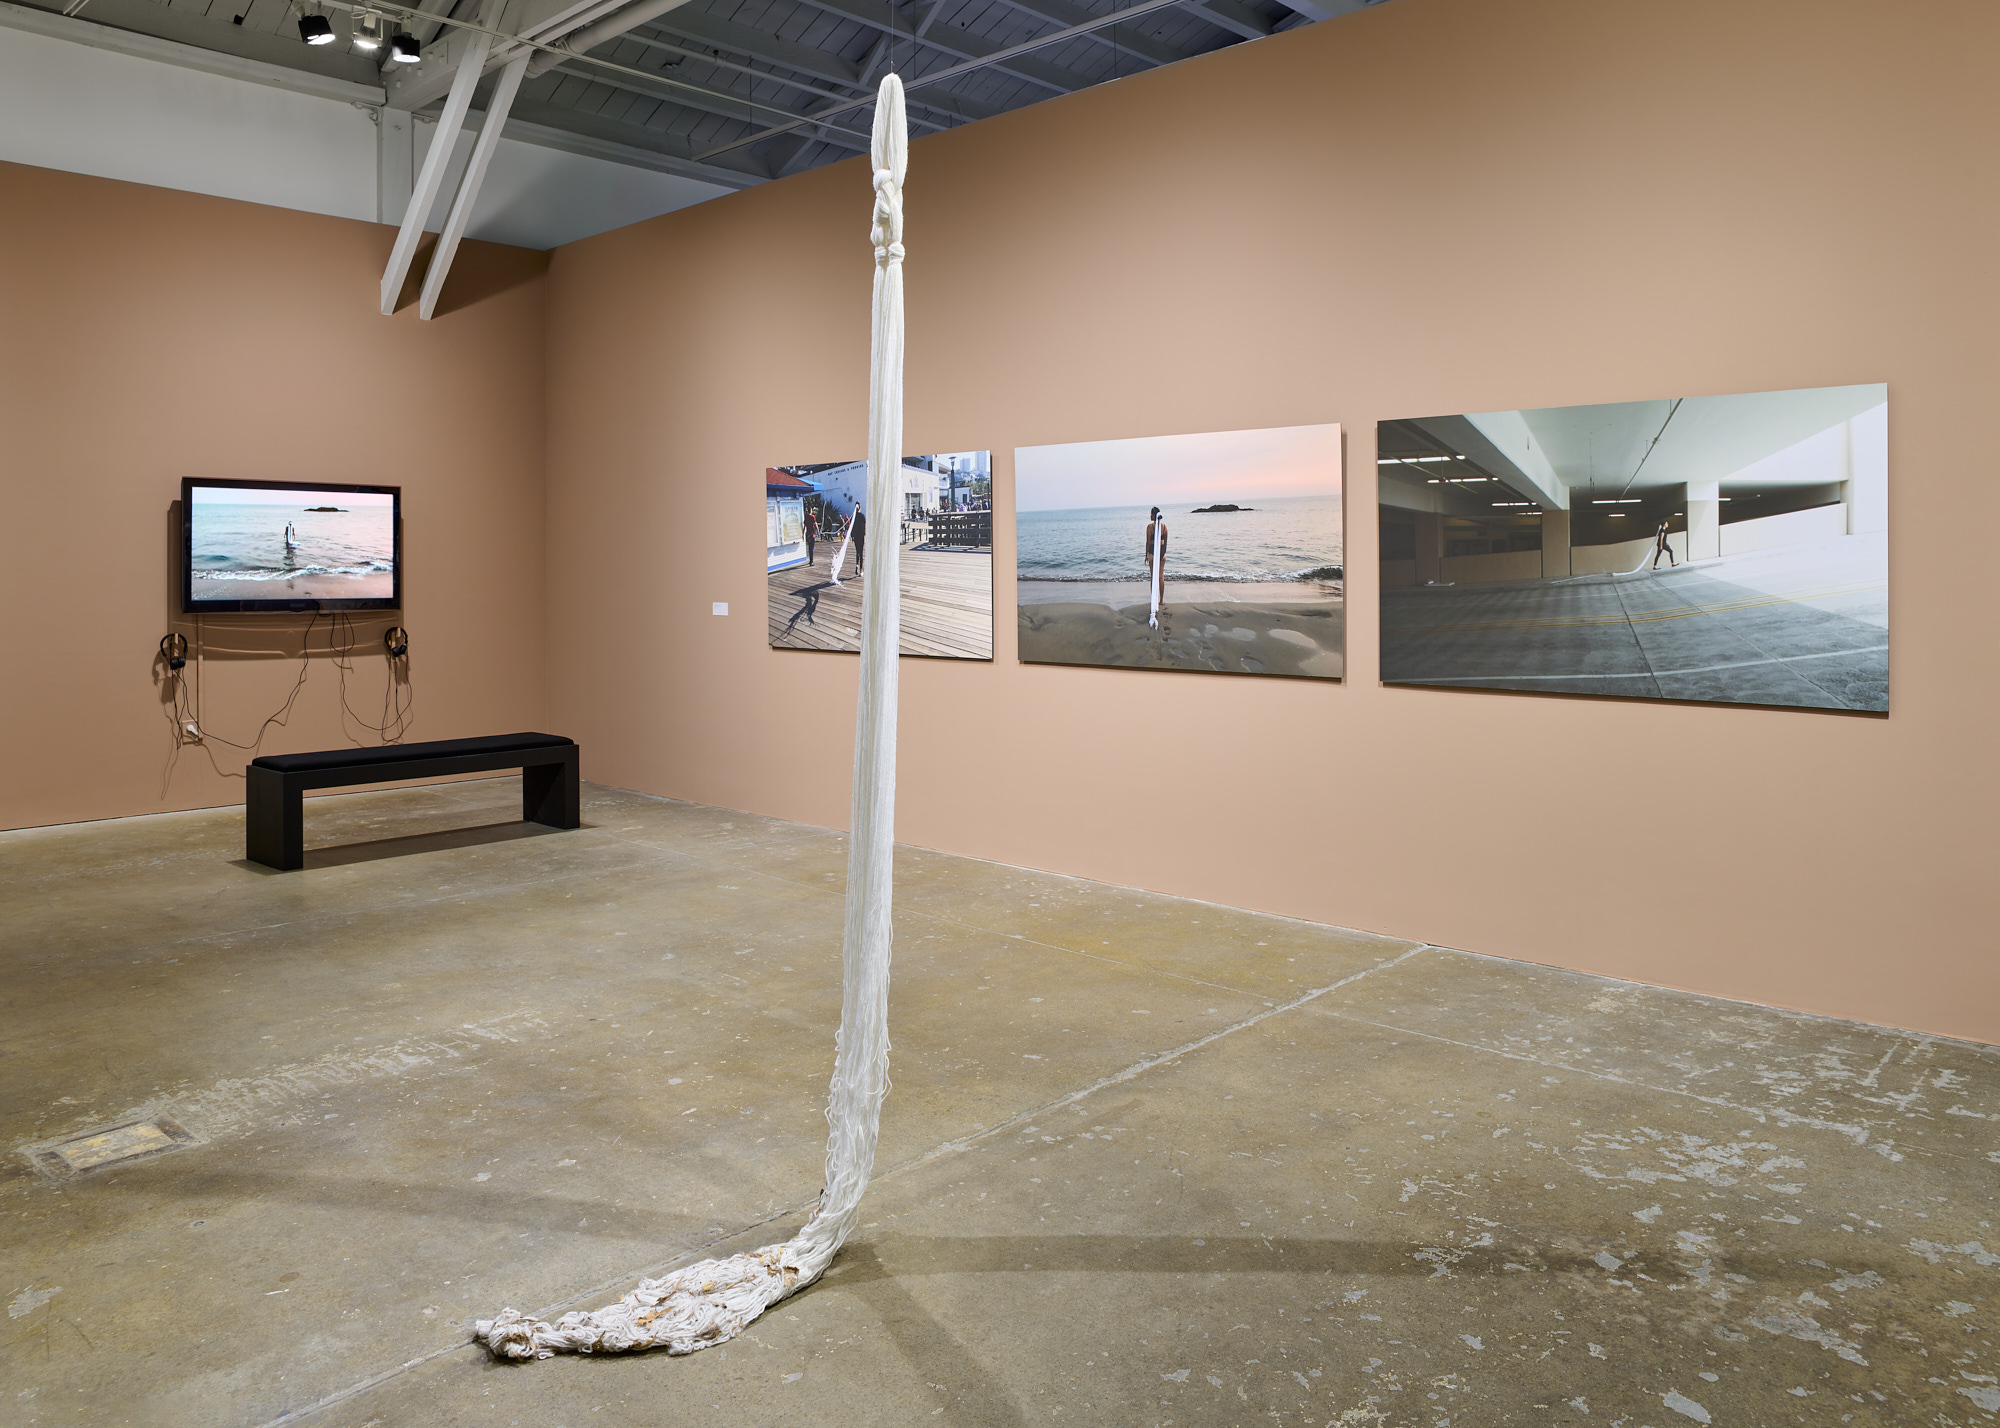 Tan walls with video and three photographic prints, hanging textile sculpture rests on floor